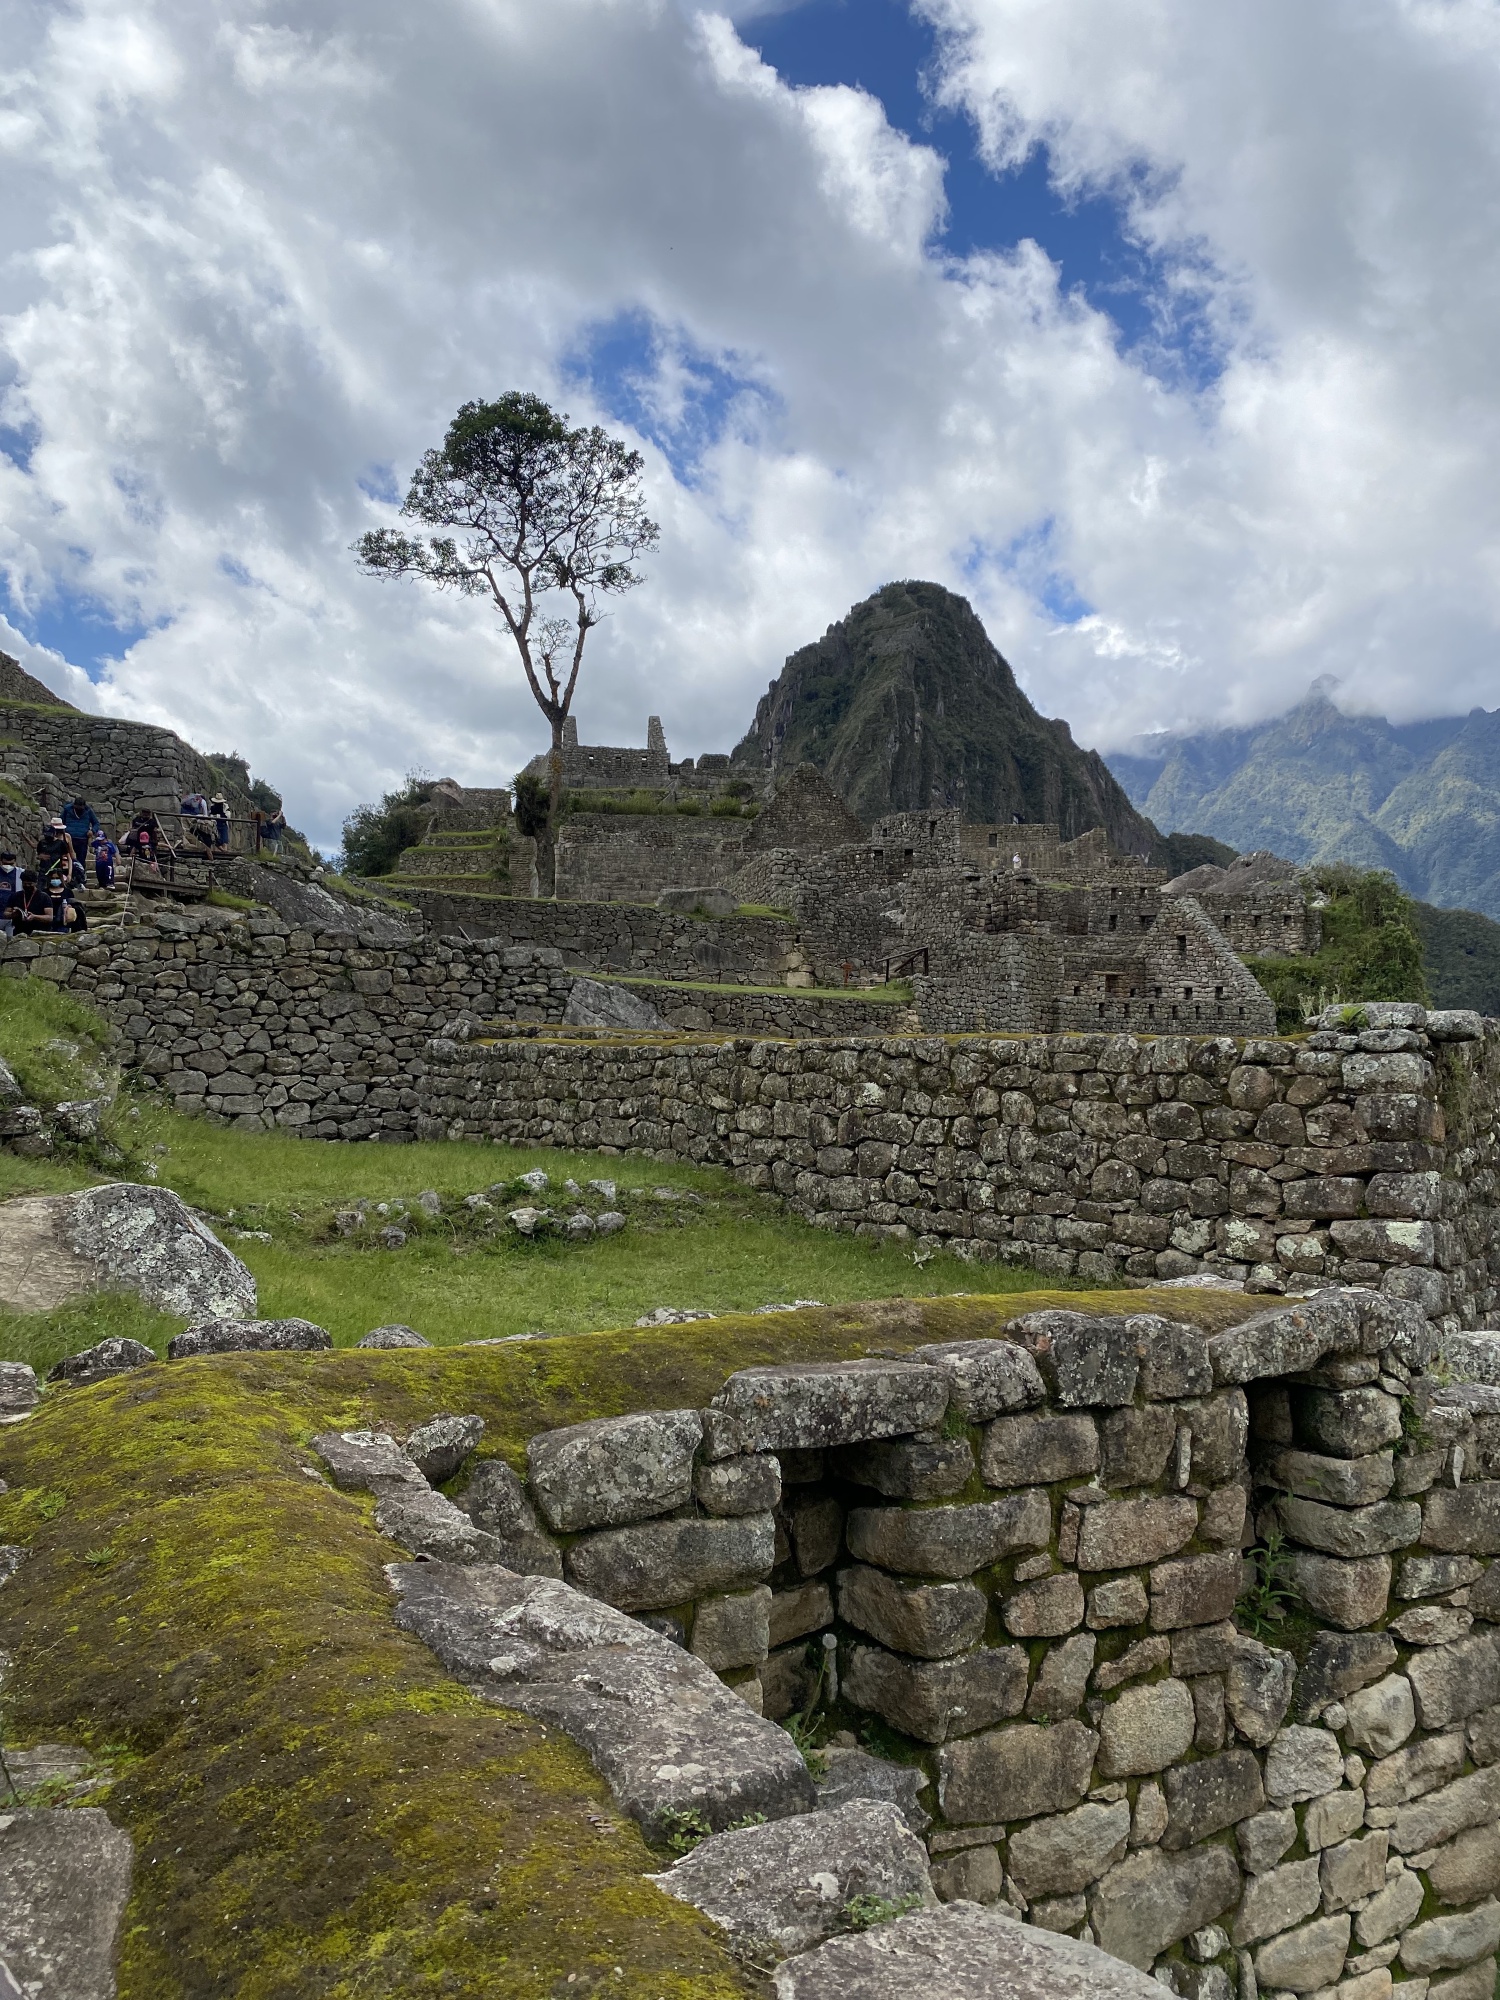 On the way out of Machu Picchu...